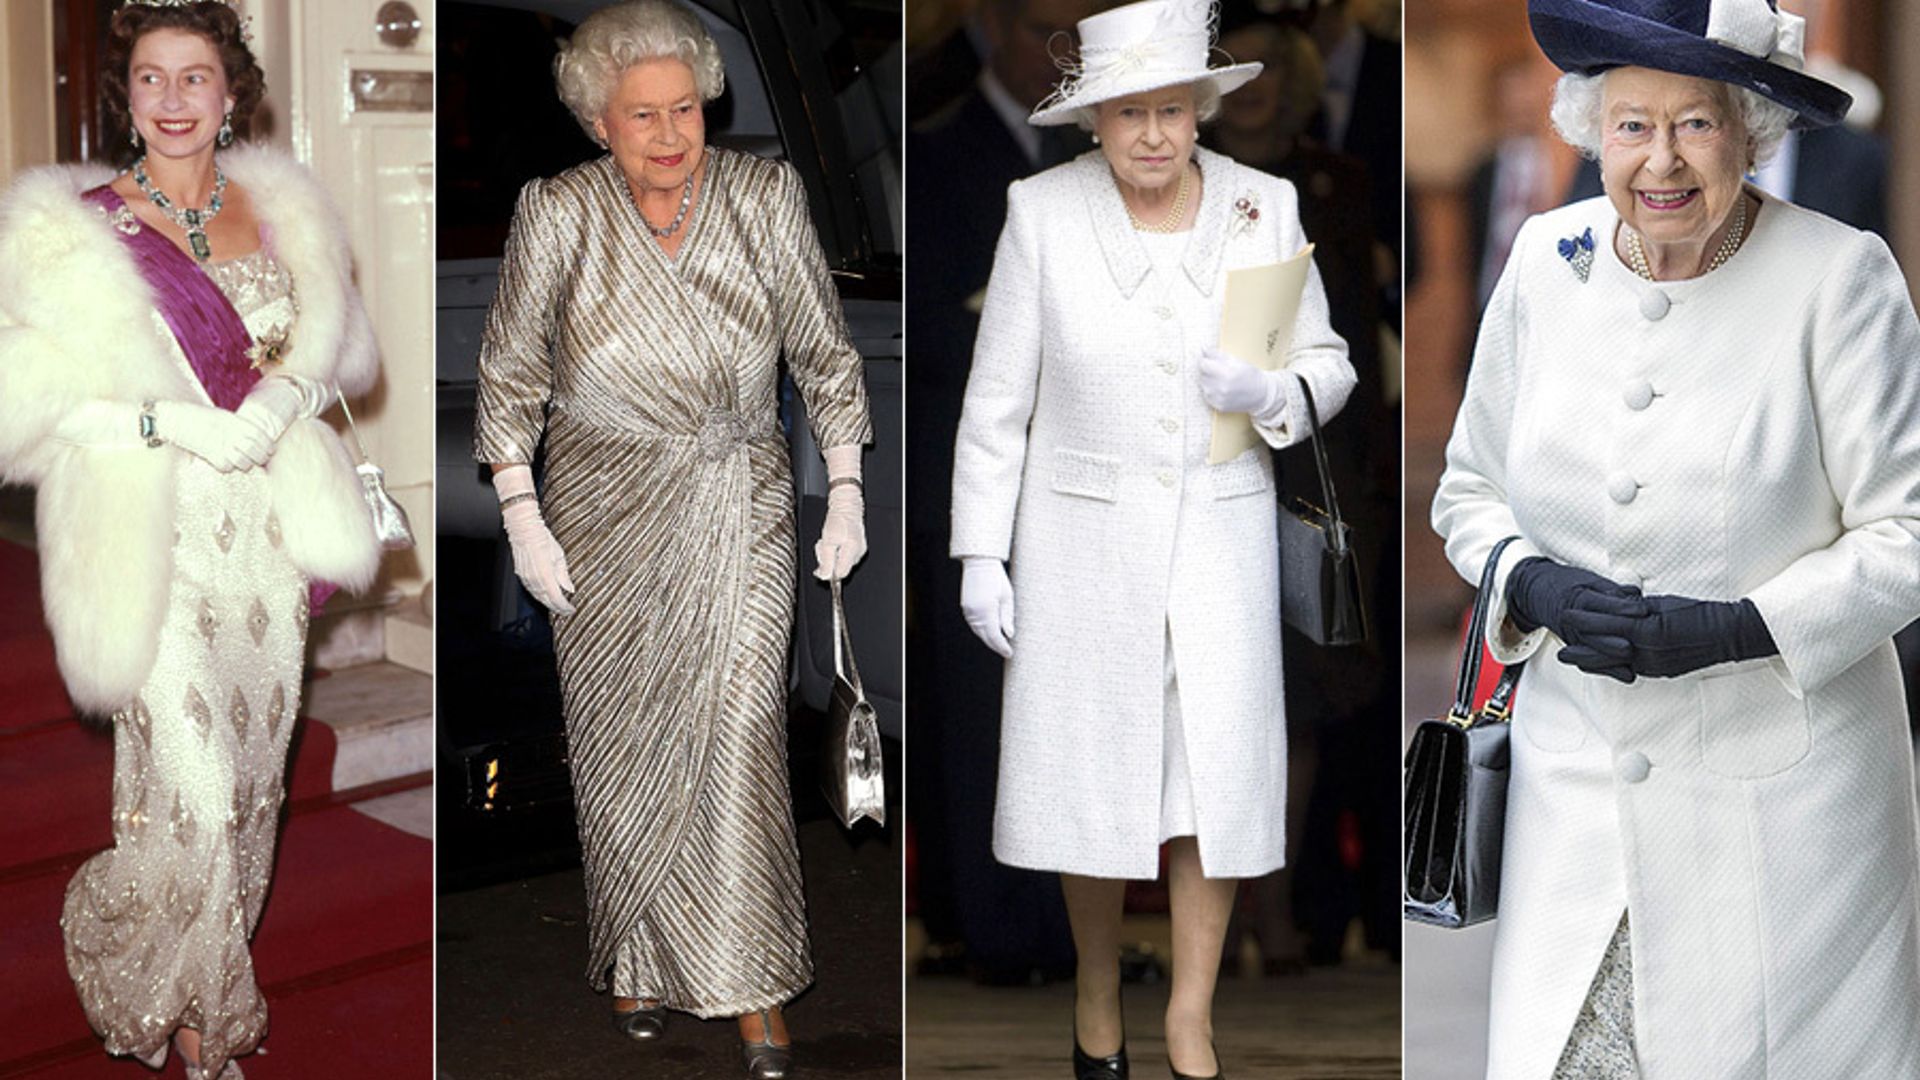 The Queen's best fashion moments in white